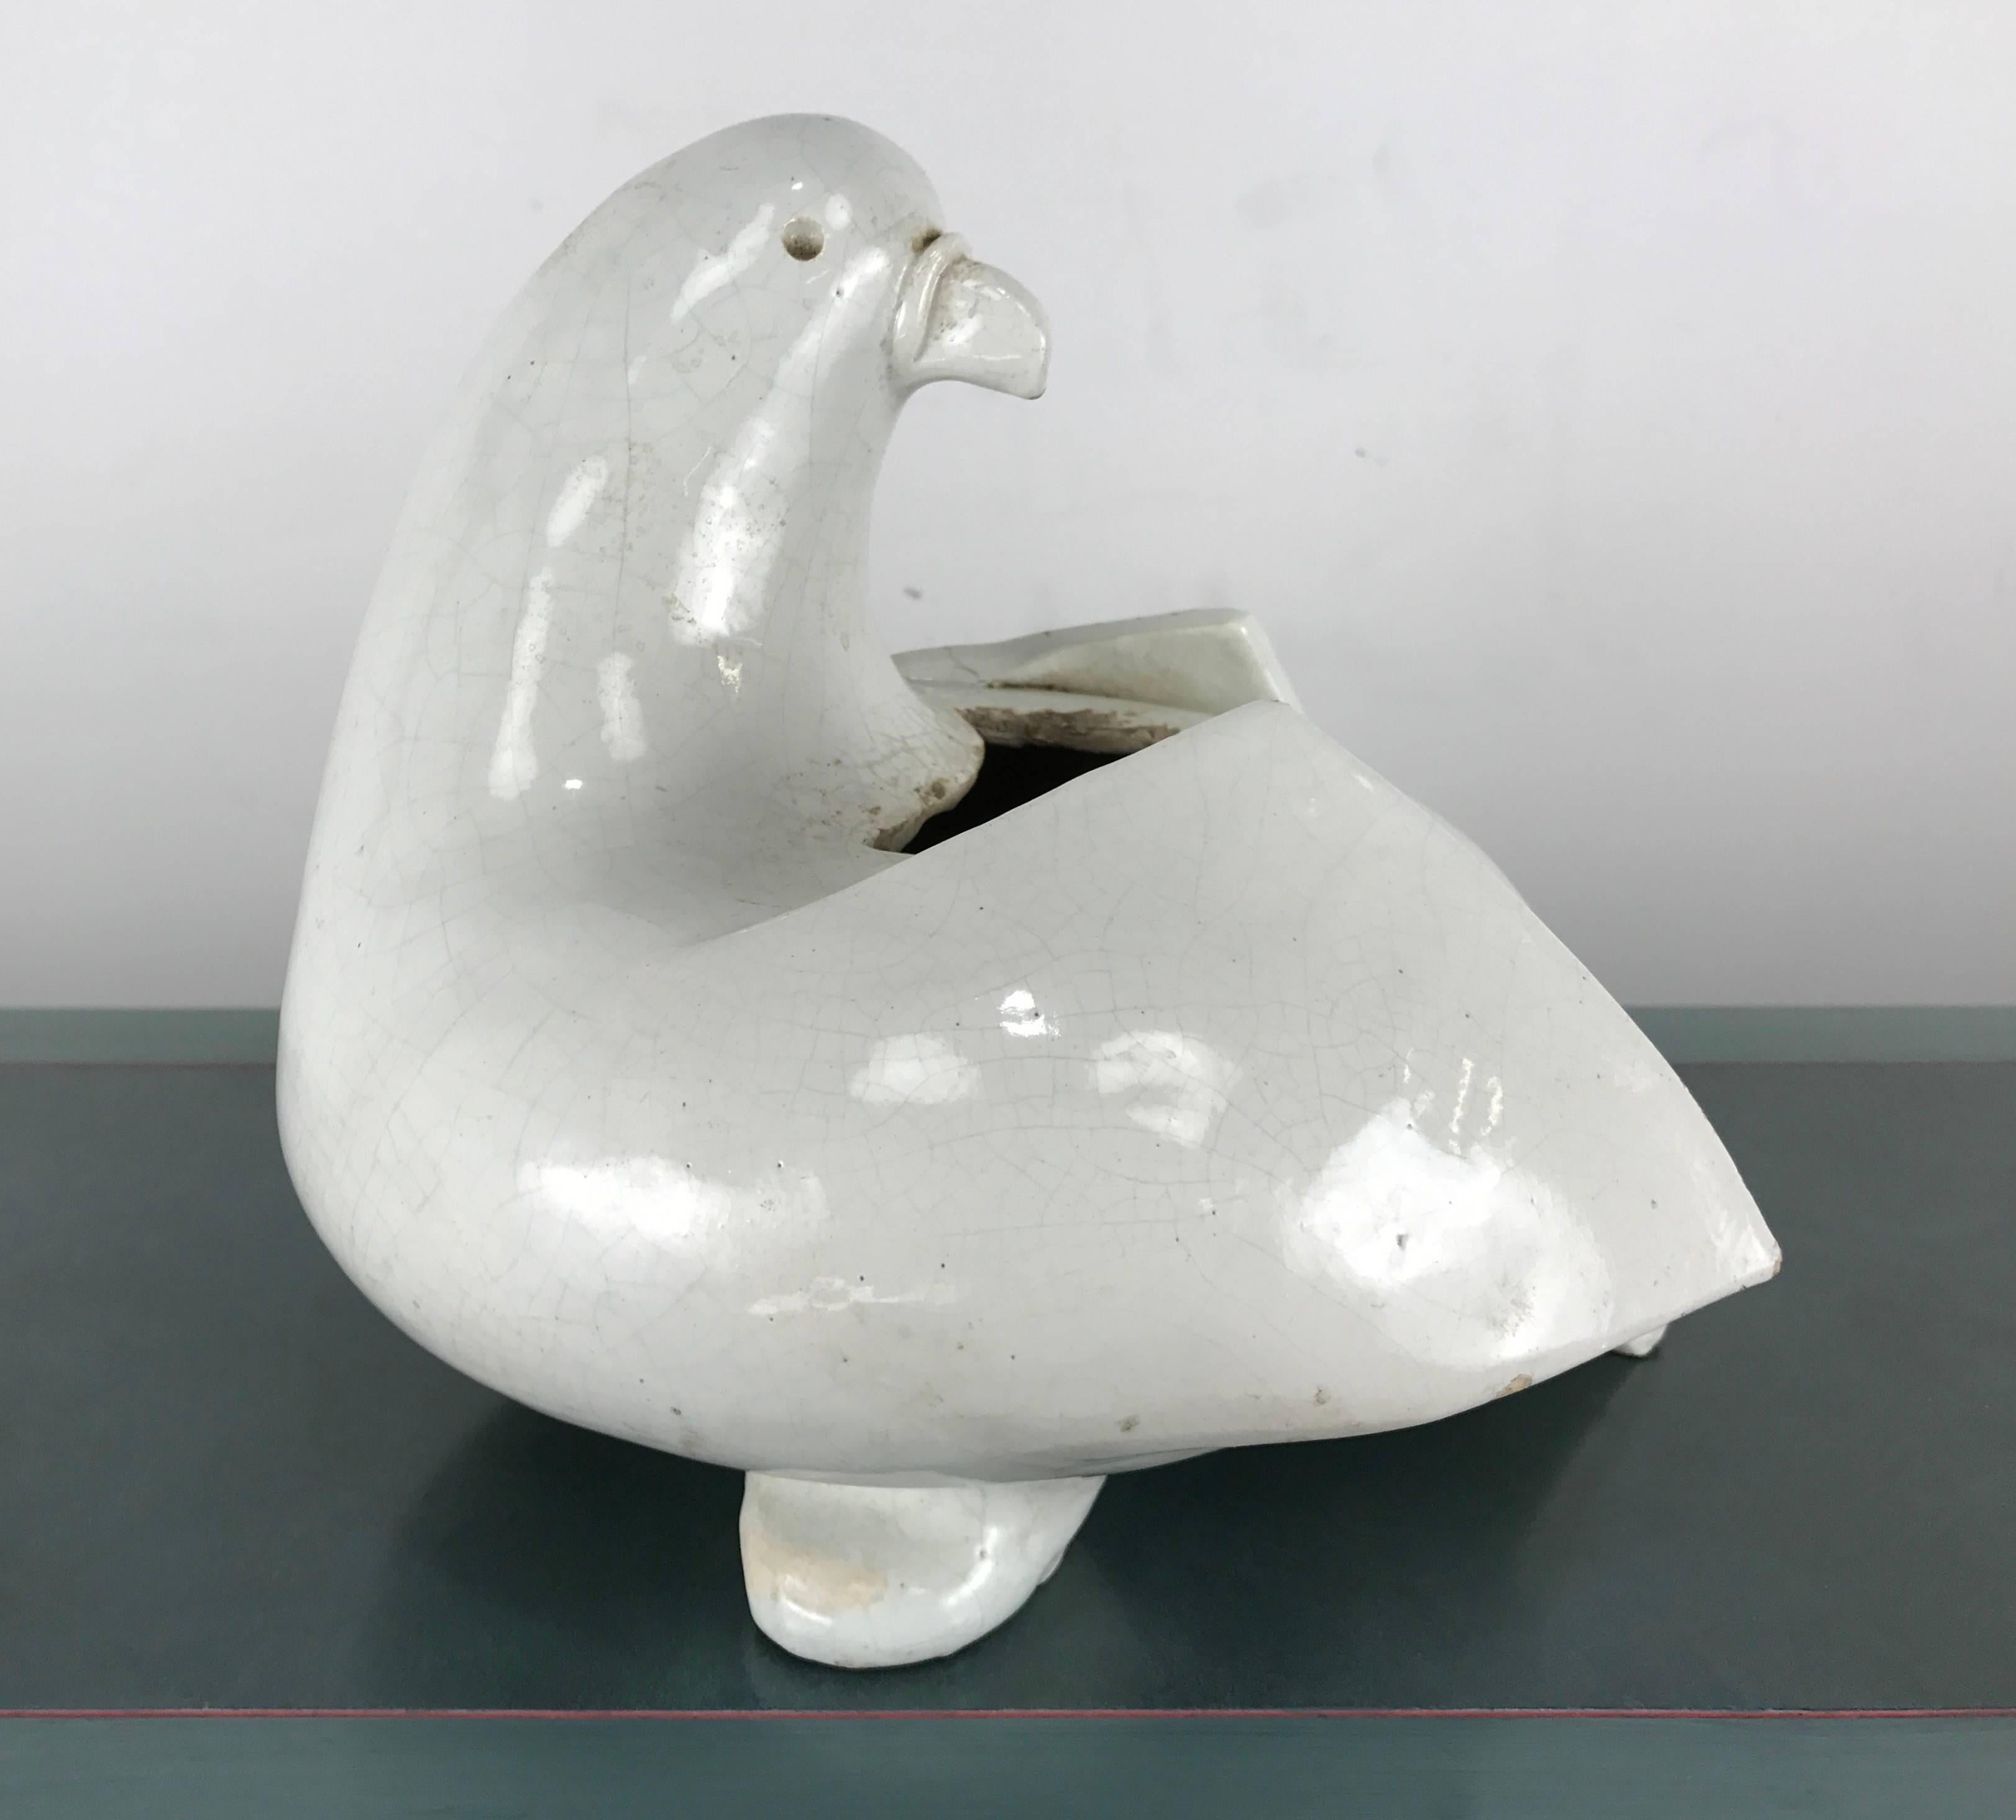 Modernist studio pottery planter or sculpture.

White dove in contemporary stylized design. Beautiful form that combines geometry and fluidity. Smooth texture with wonderful patina and proportion.

Possibly Italian.